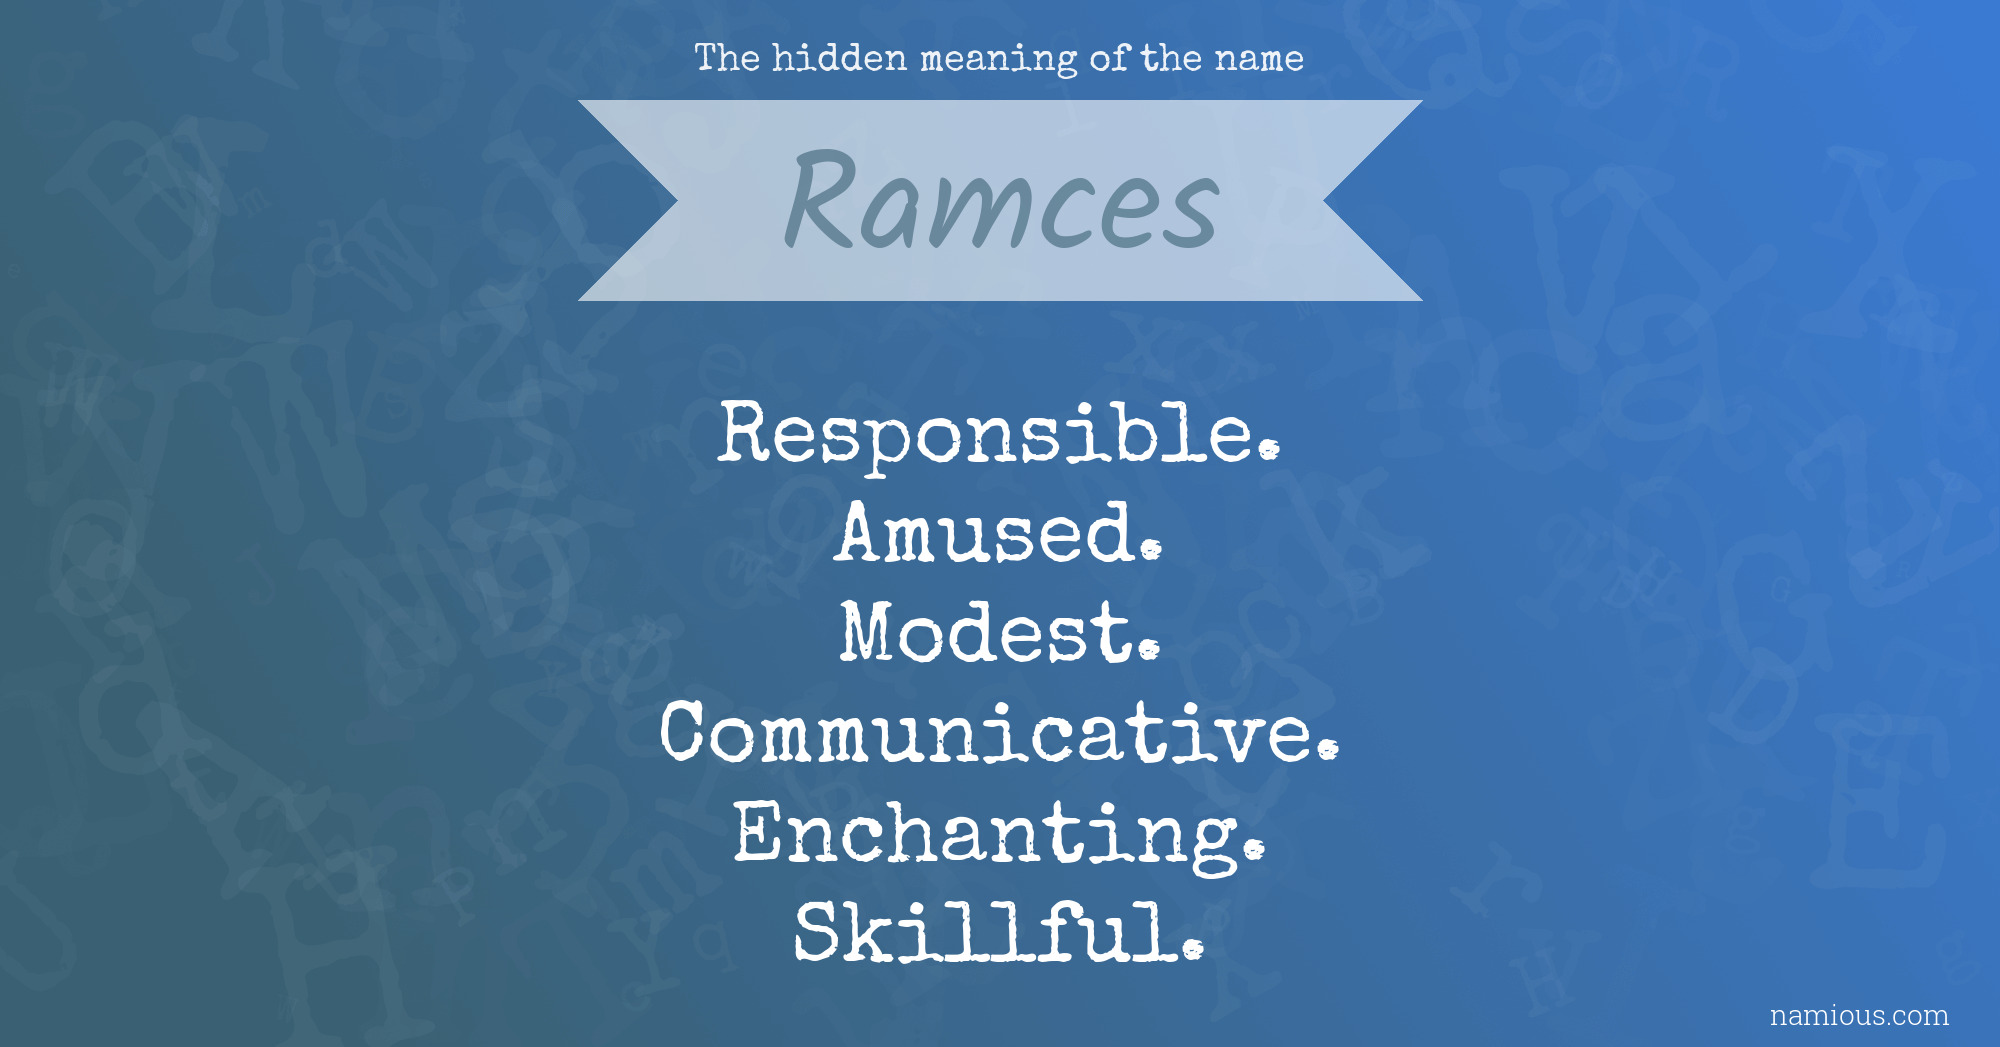 The hidden meaning of the name Ramces